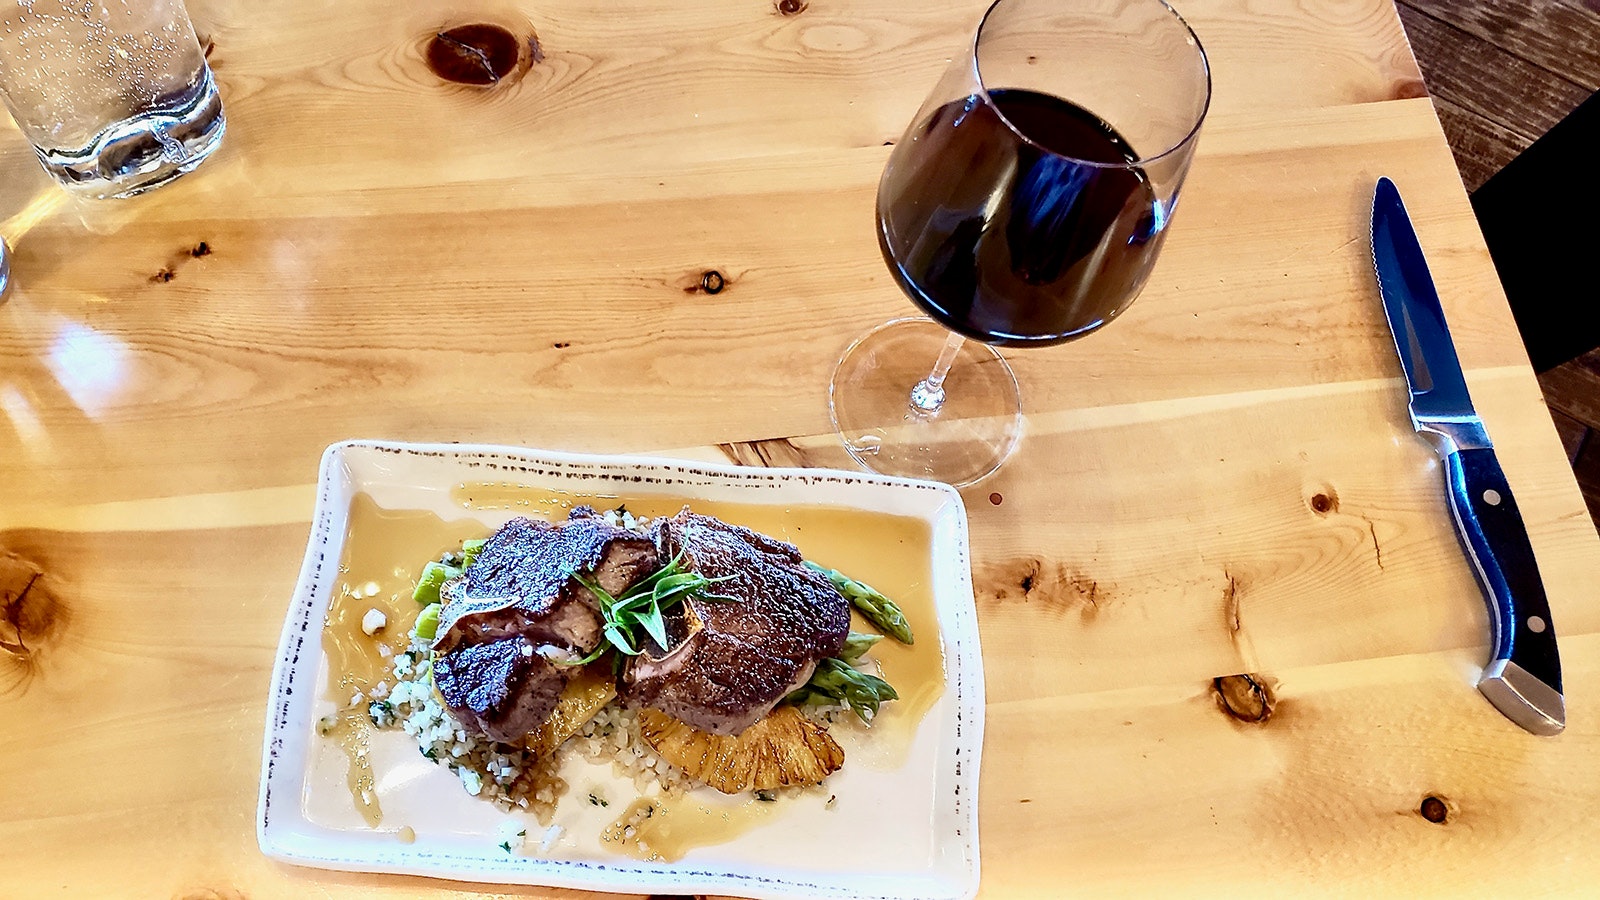 Lamb T-bone steak with cauliflower rice and Spanish wine makes a uniquely Western, yet high-end, meal at Bird and Jim in Estes Park, Colorado.